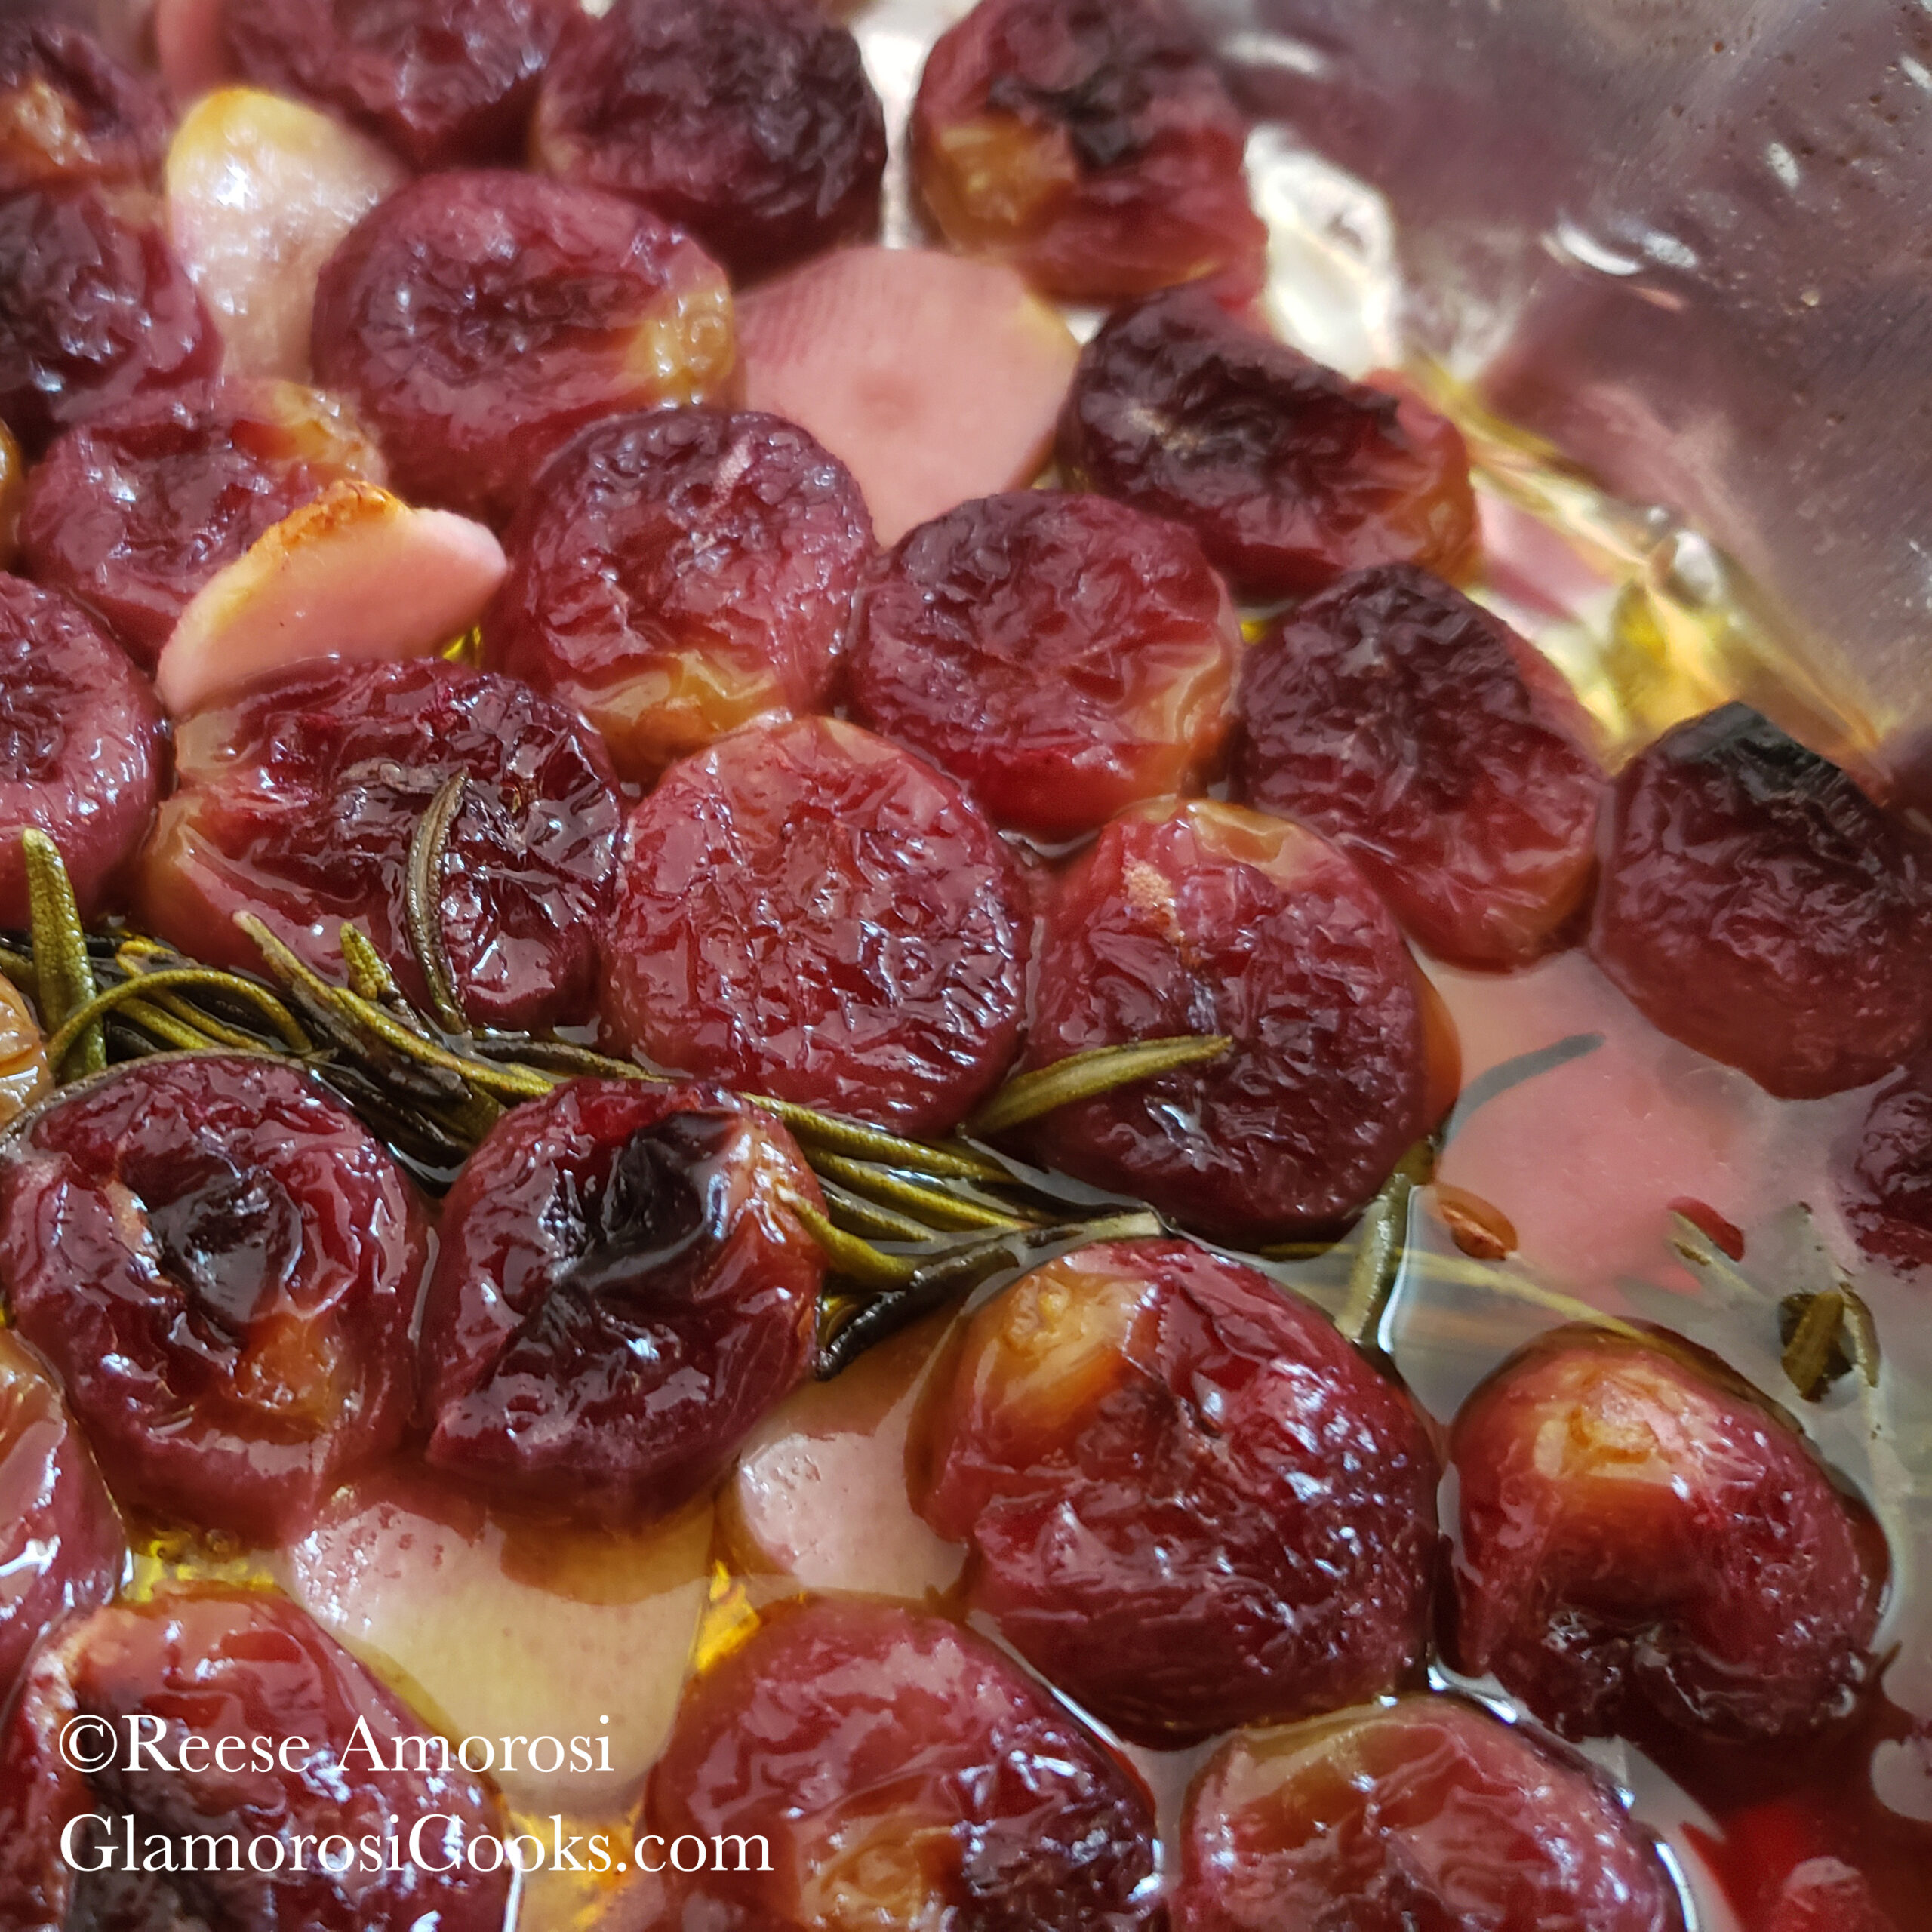 This photo shows the completed Roasted Grapes recipe by Reese Amorosi of GlamorosiCooks.com. The seedless red grapes are charred on purpose, as that is part of what makes the flavor so good. The grapes are in a shallow bowl that is barely visible due to how close the photo was taken. The grapes were roasted with sliced garlic that has turned a slightly pinkish hue from the juices released by the fruit during cooking. More of that juice is visible in the bottom-right corner. Fresh rosemary was roasted with the grapes, too - one of the sprigs cuts across the photo in a downward diagonal position from left to right.